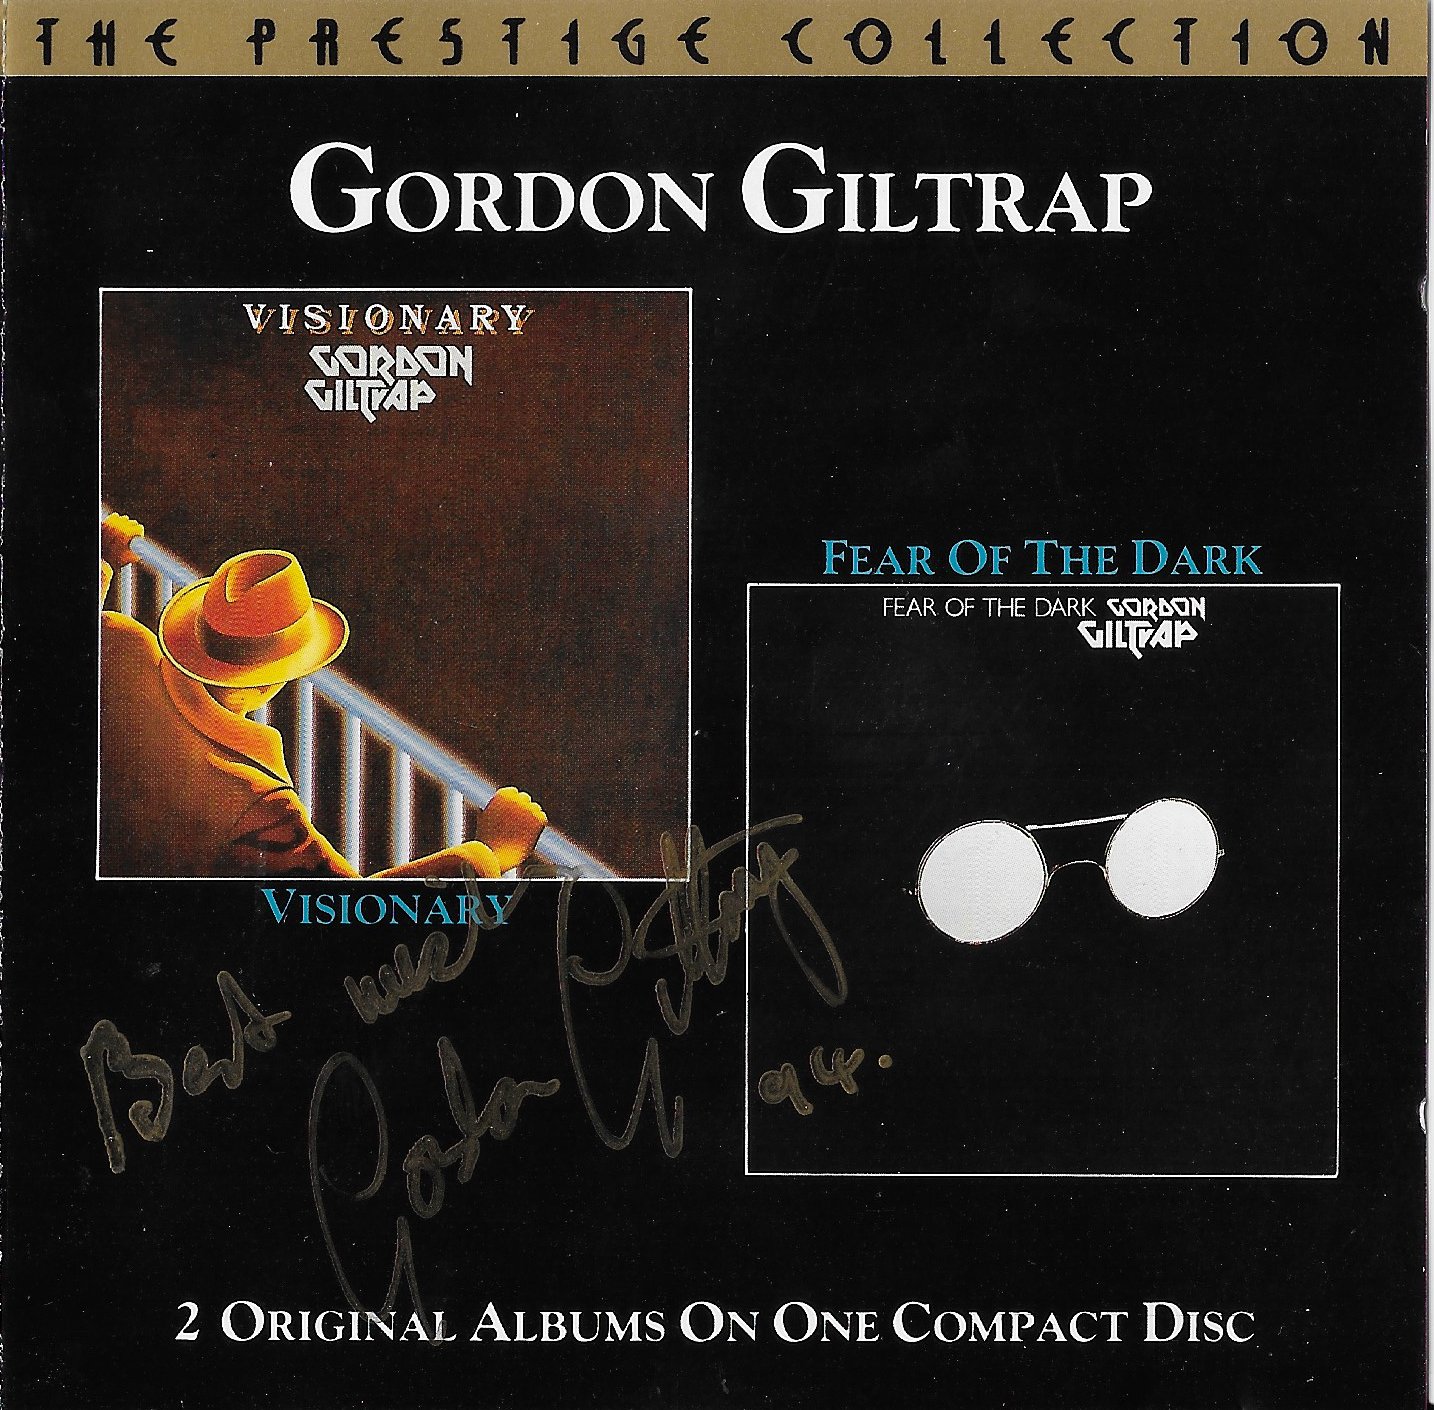 Picture of CDPM 851 Visionary / Fear Of The Dark - Autographed by artist Gordon Giltrap from the BBC cds - Records and Tapes library